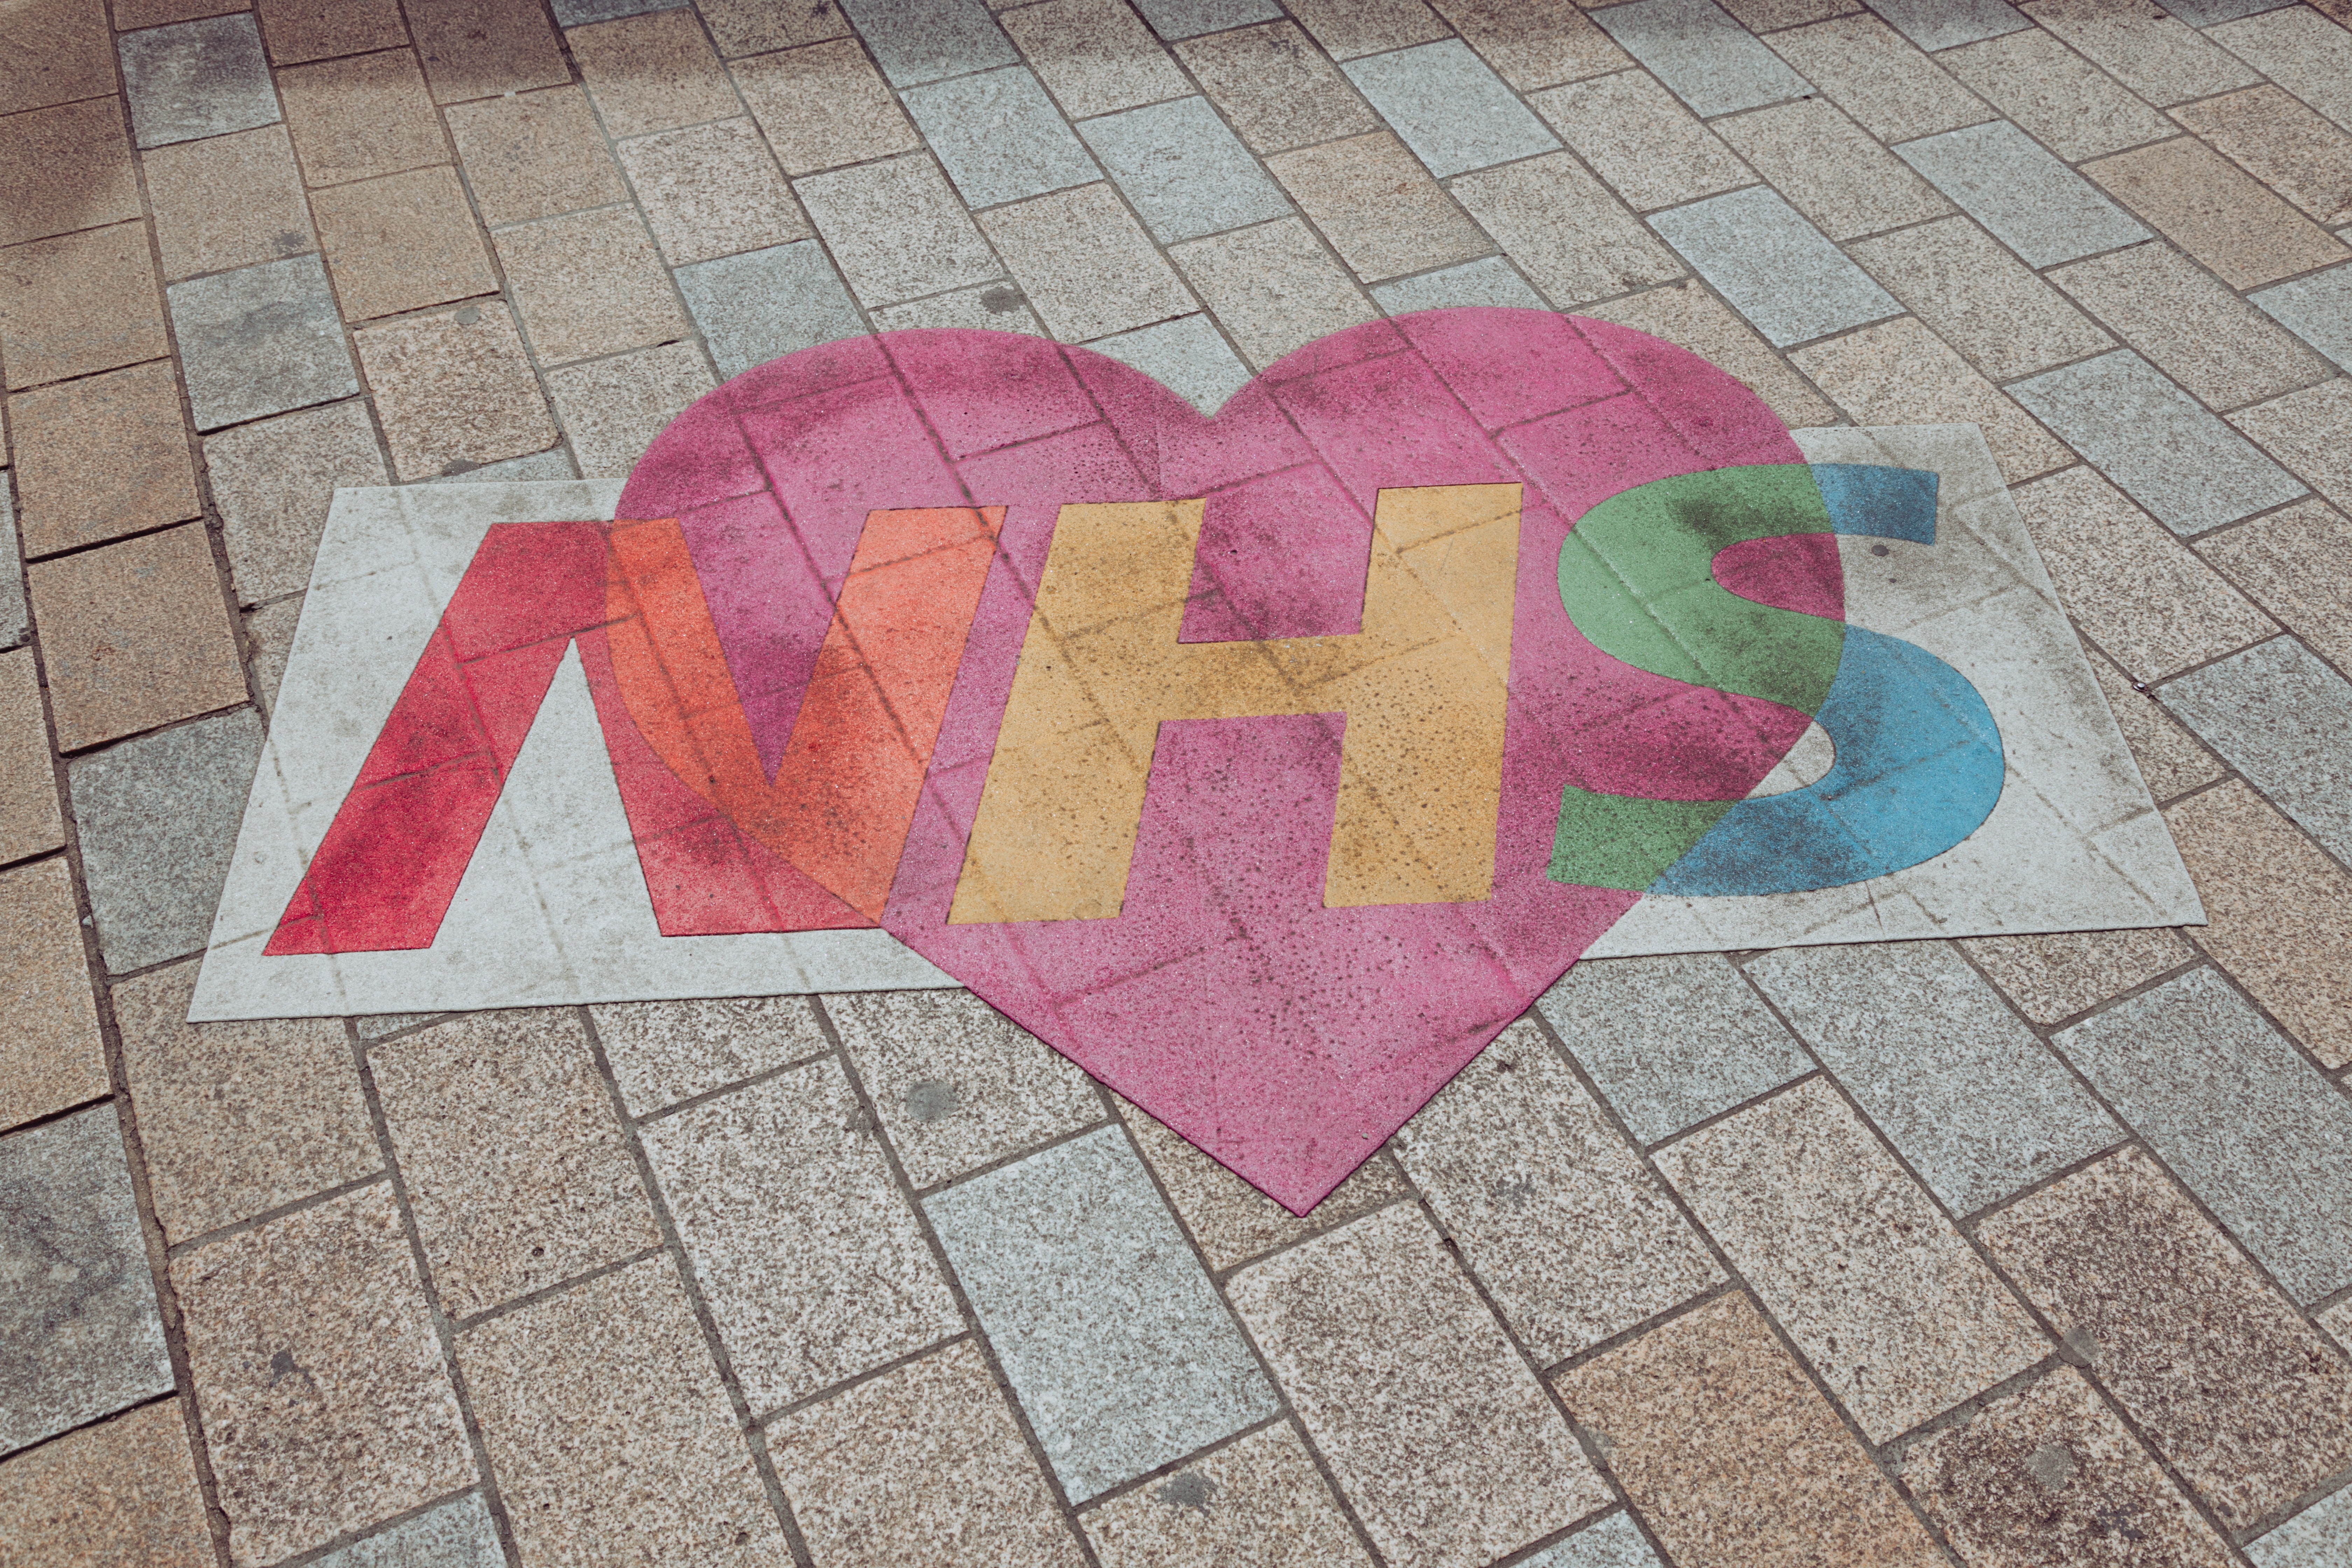 A chalk drawing of the NHS logo in pink, yellow and green lies on top of a red heart on the pavement. 